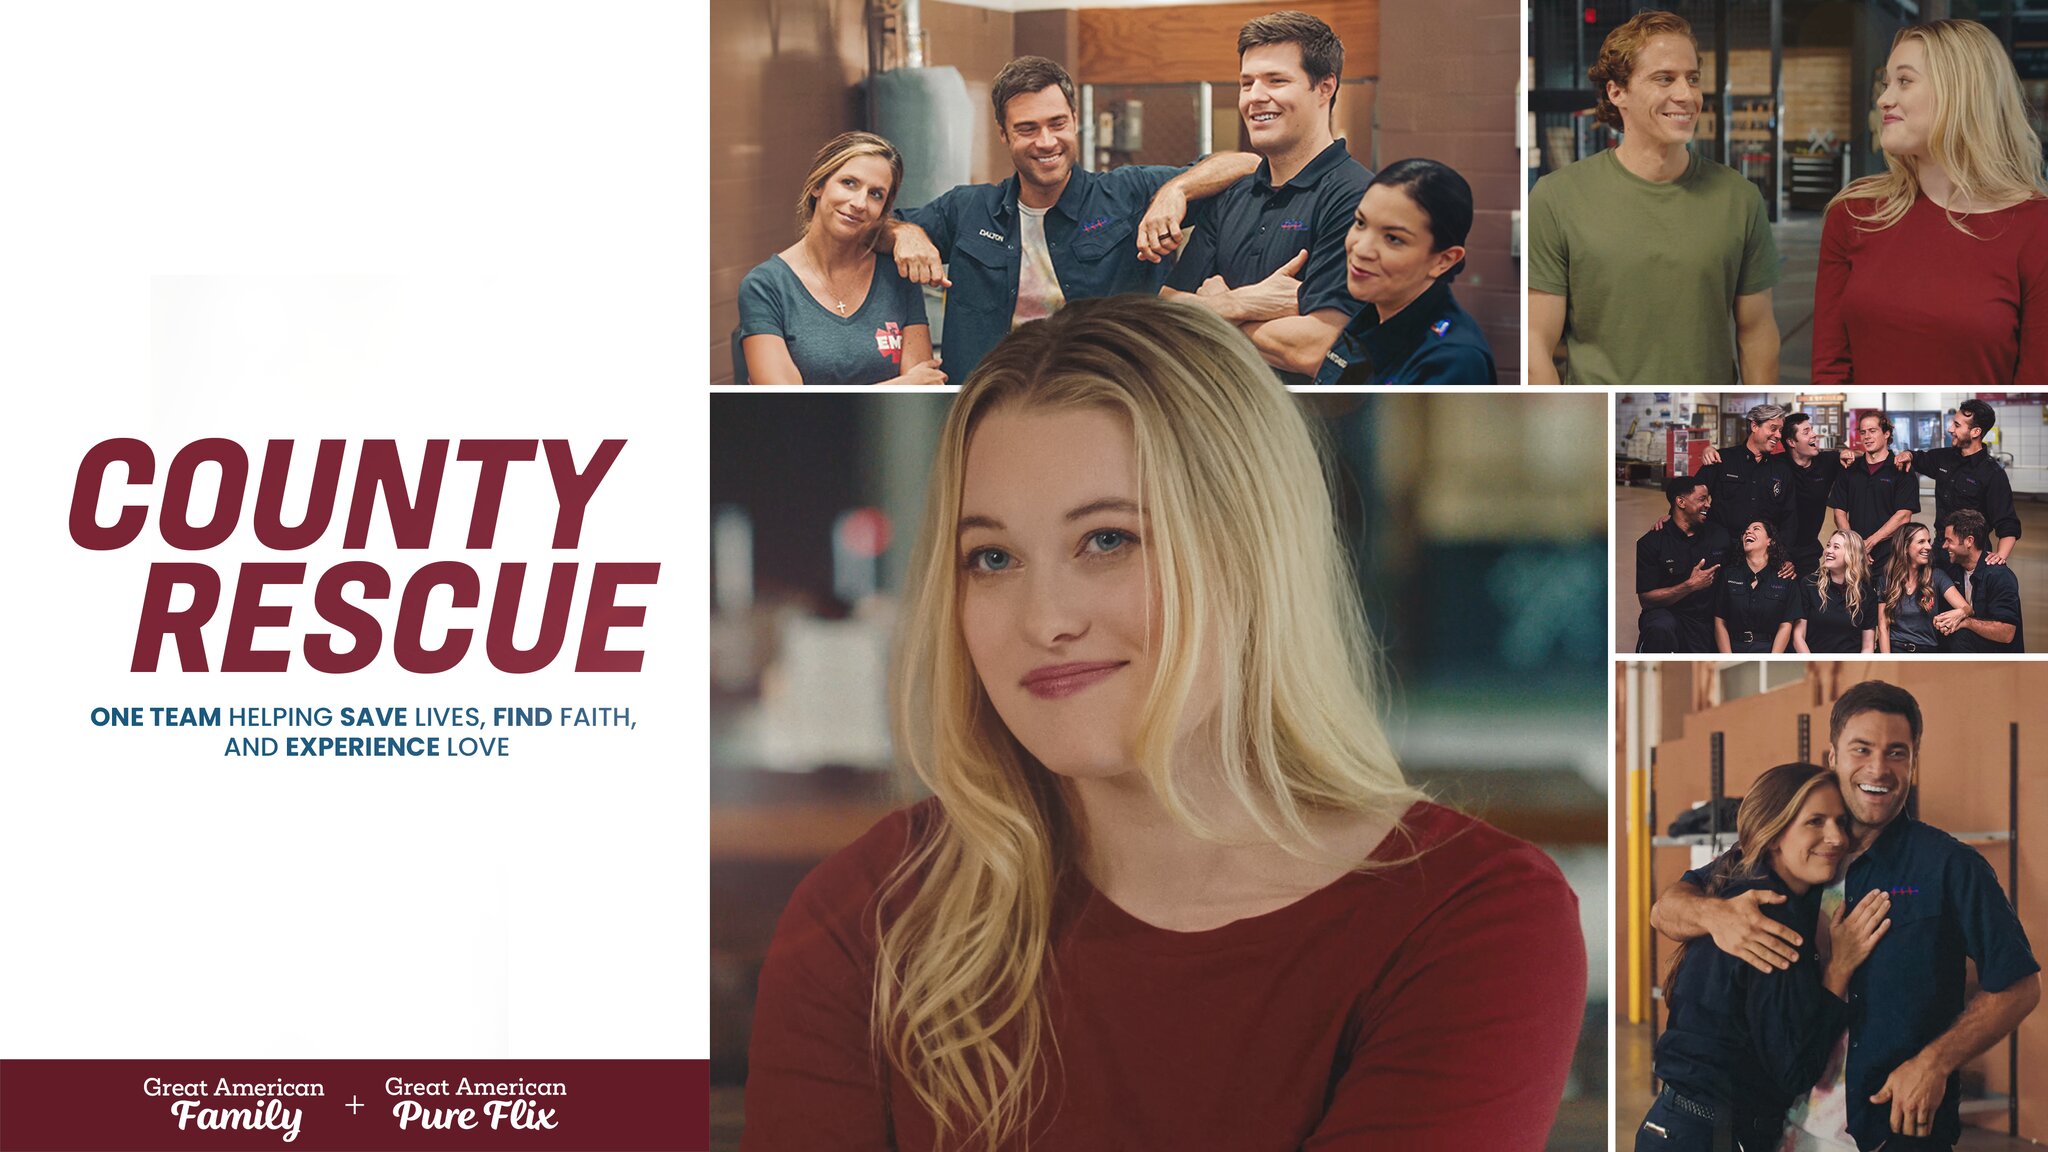 Watch County Rescue on Great American Pure Flix starting 2/23!